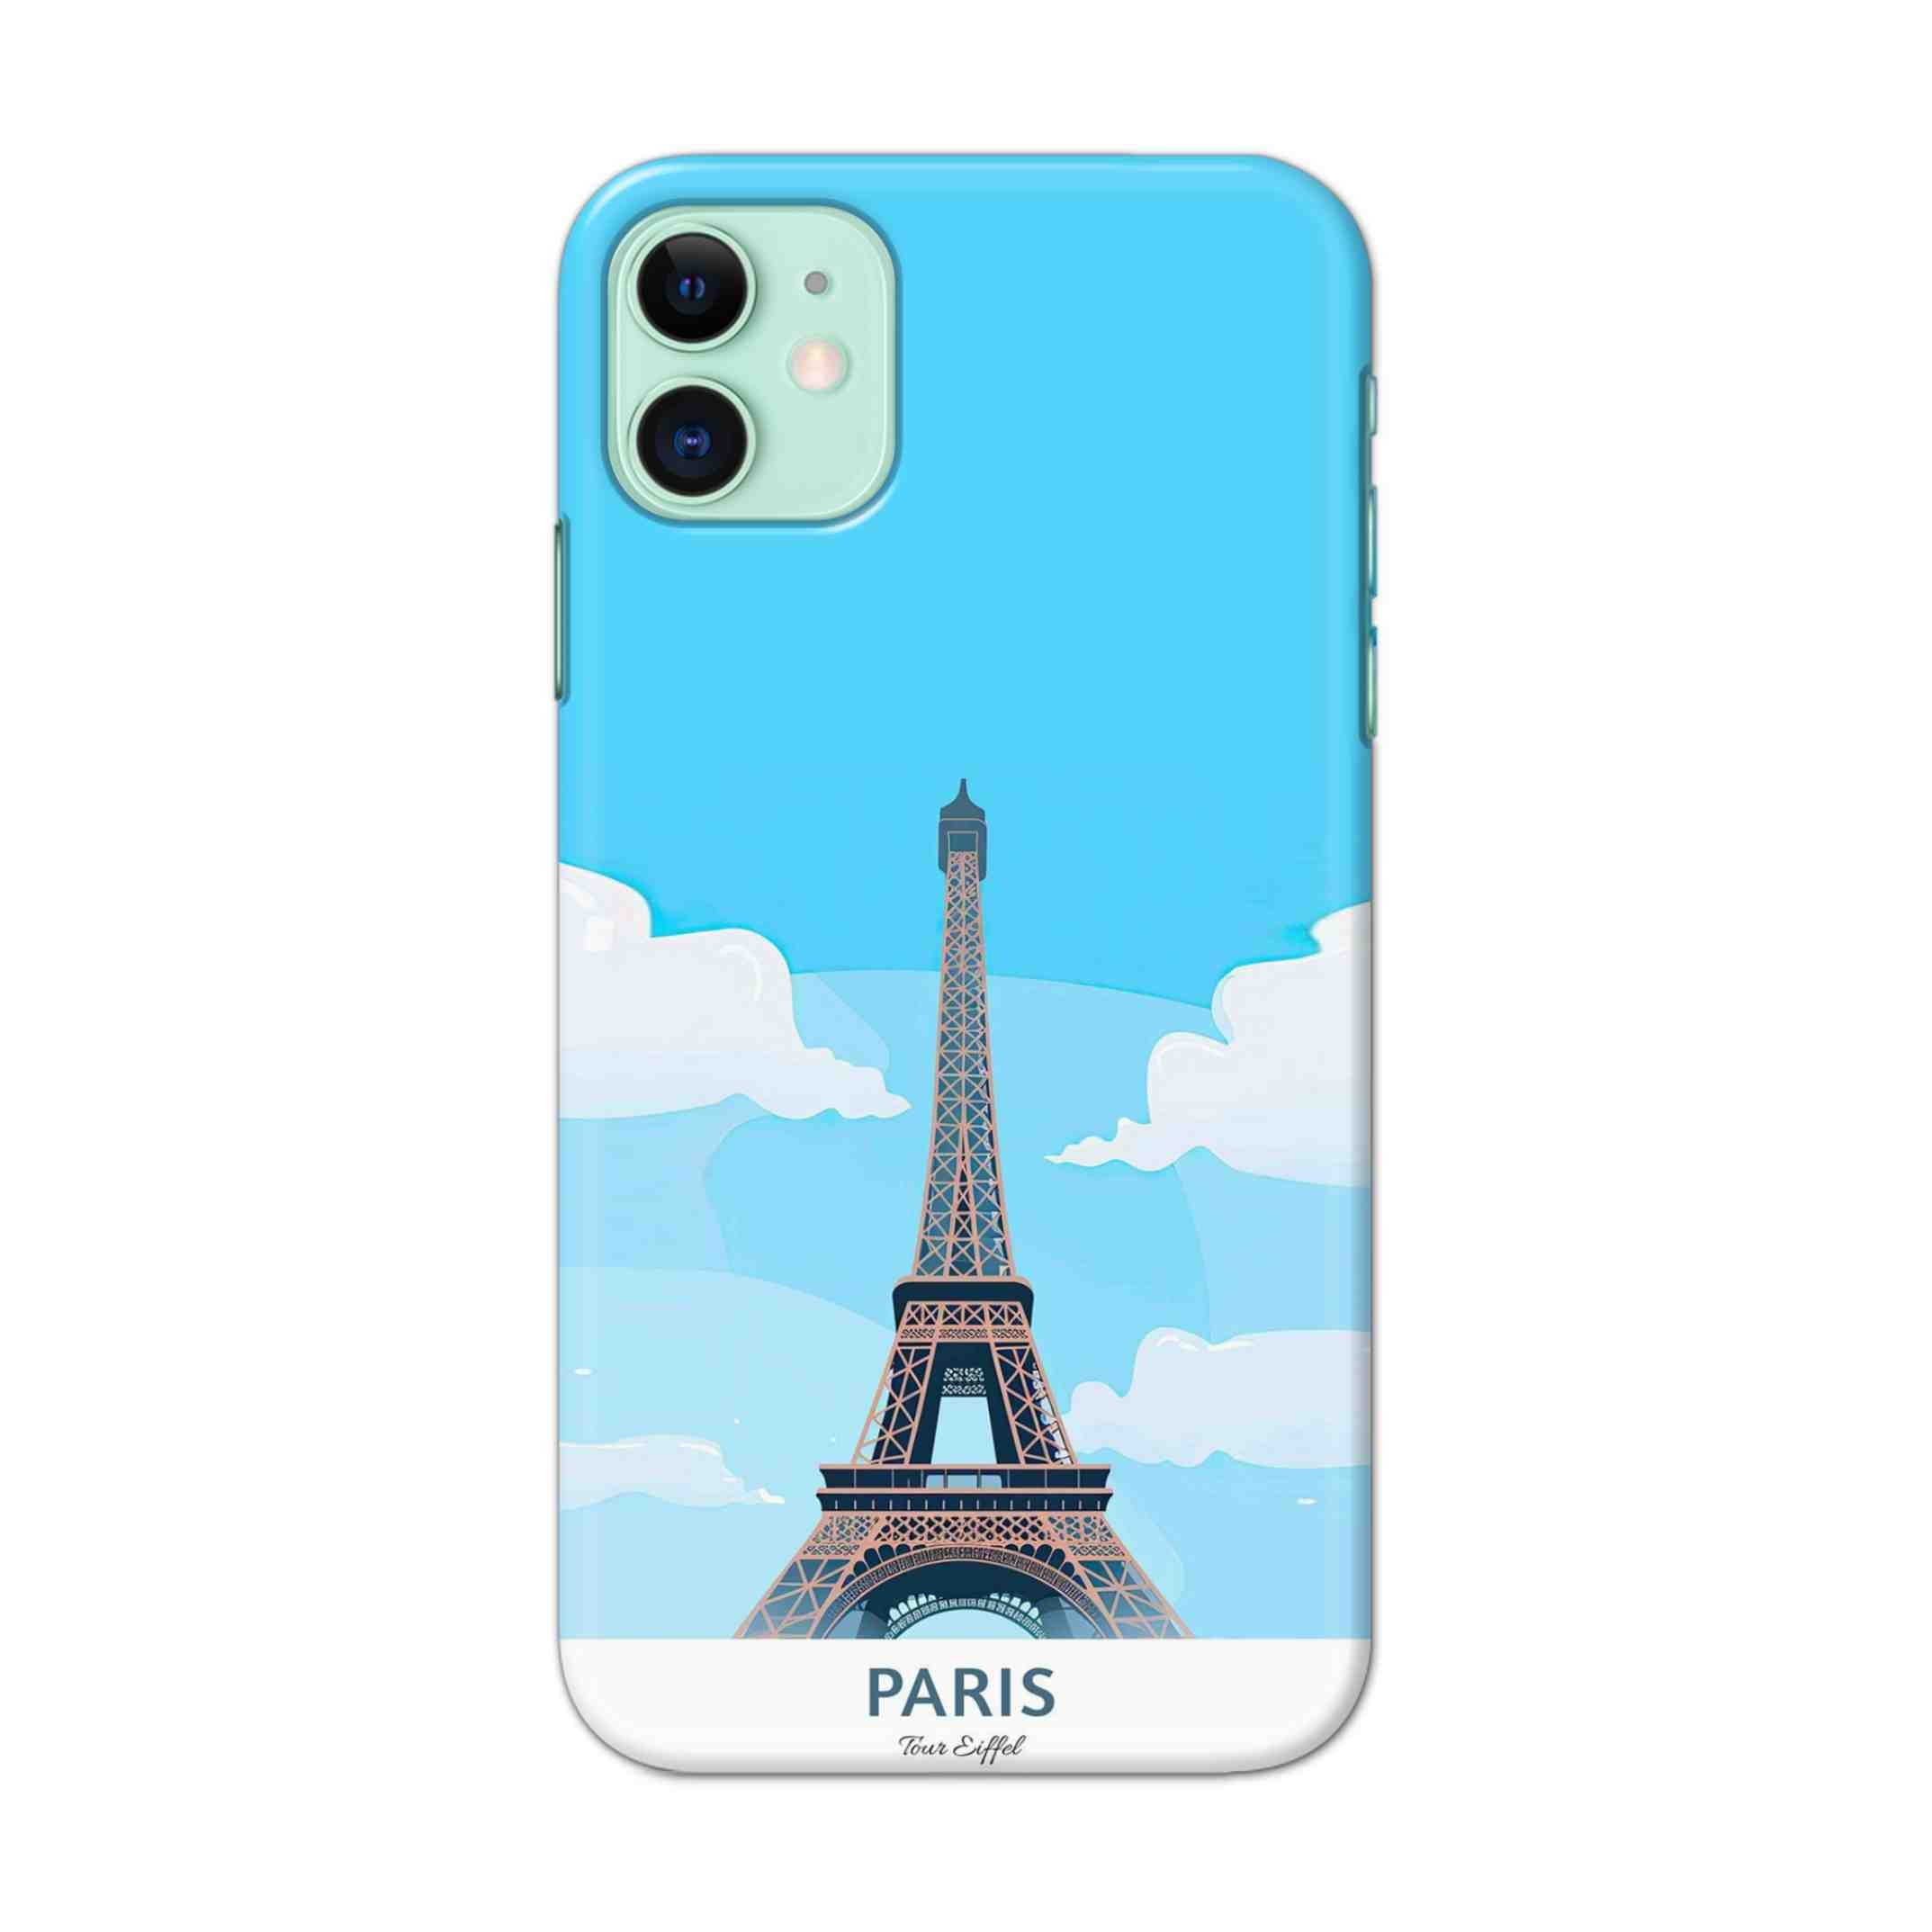 Buy Paris Hard Back Mobile Phone Case/Cover For iPhone 11 Online